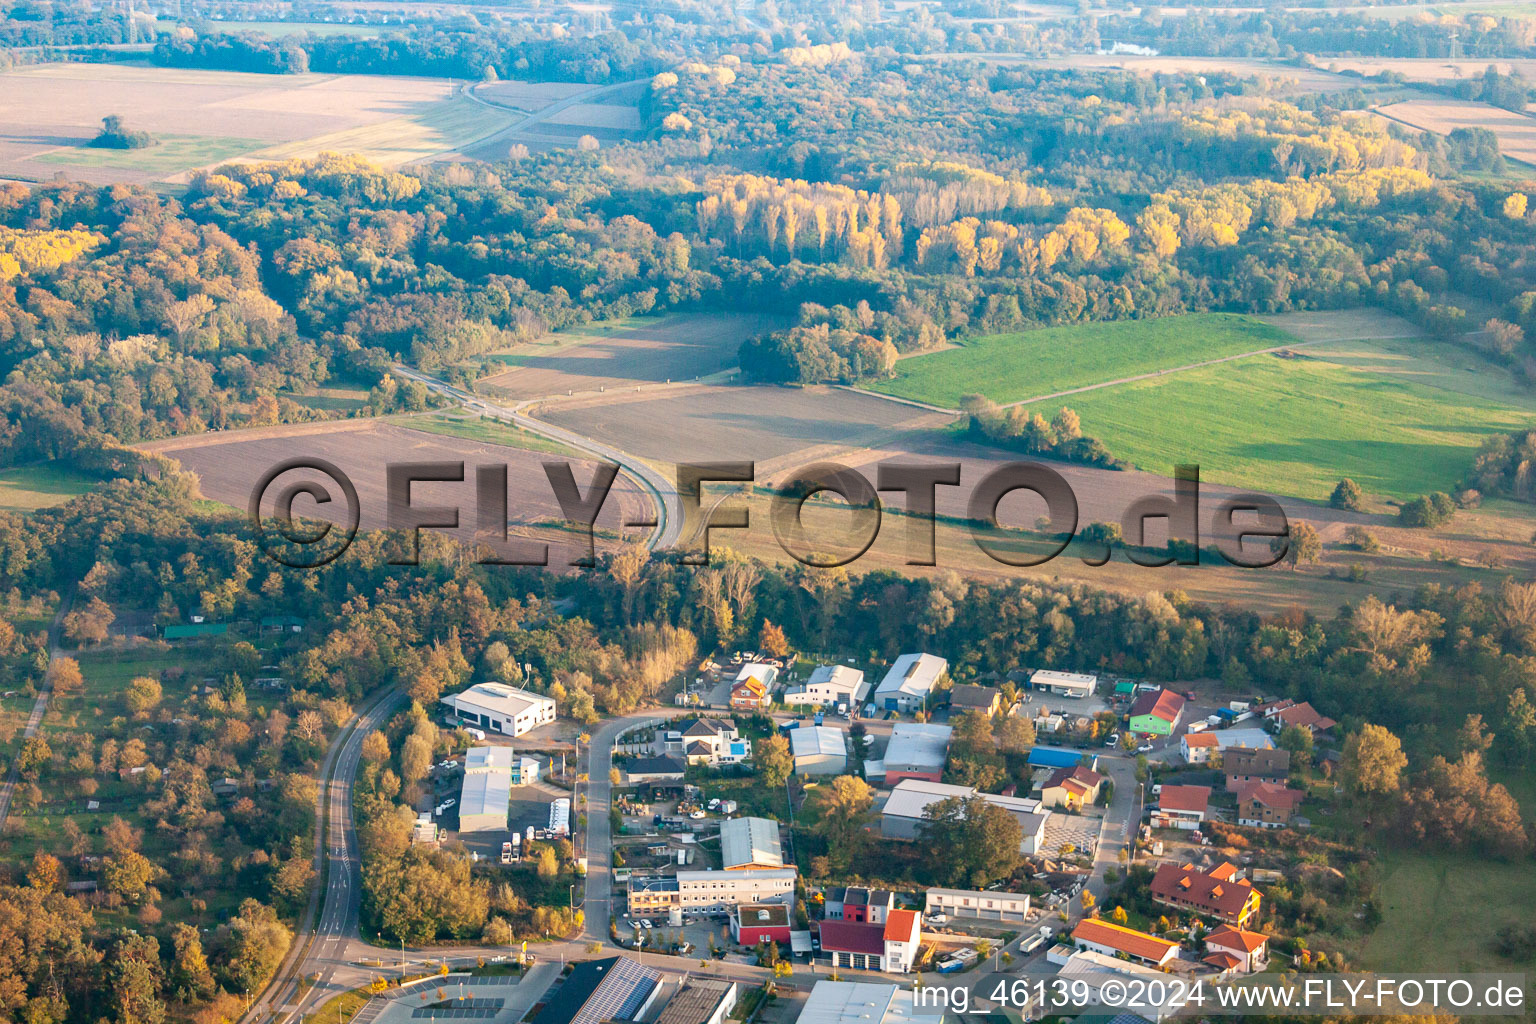 Mittelwegring commercial area in Jockgrim in the state Rhineland-Palatinate, Germany from the drone perspective